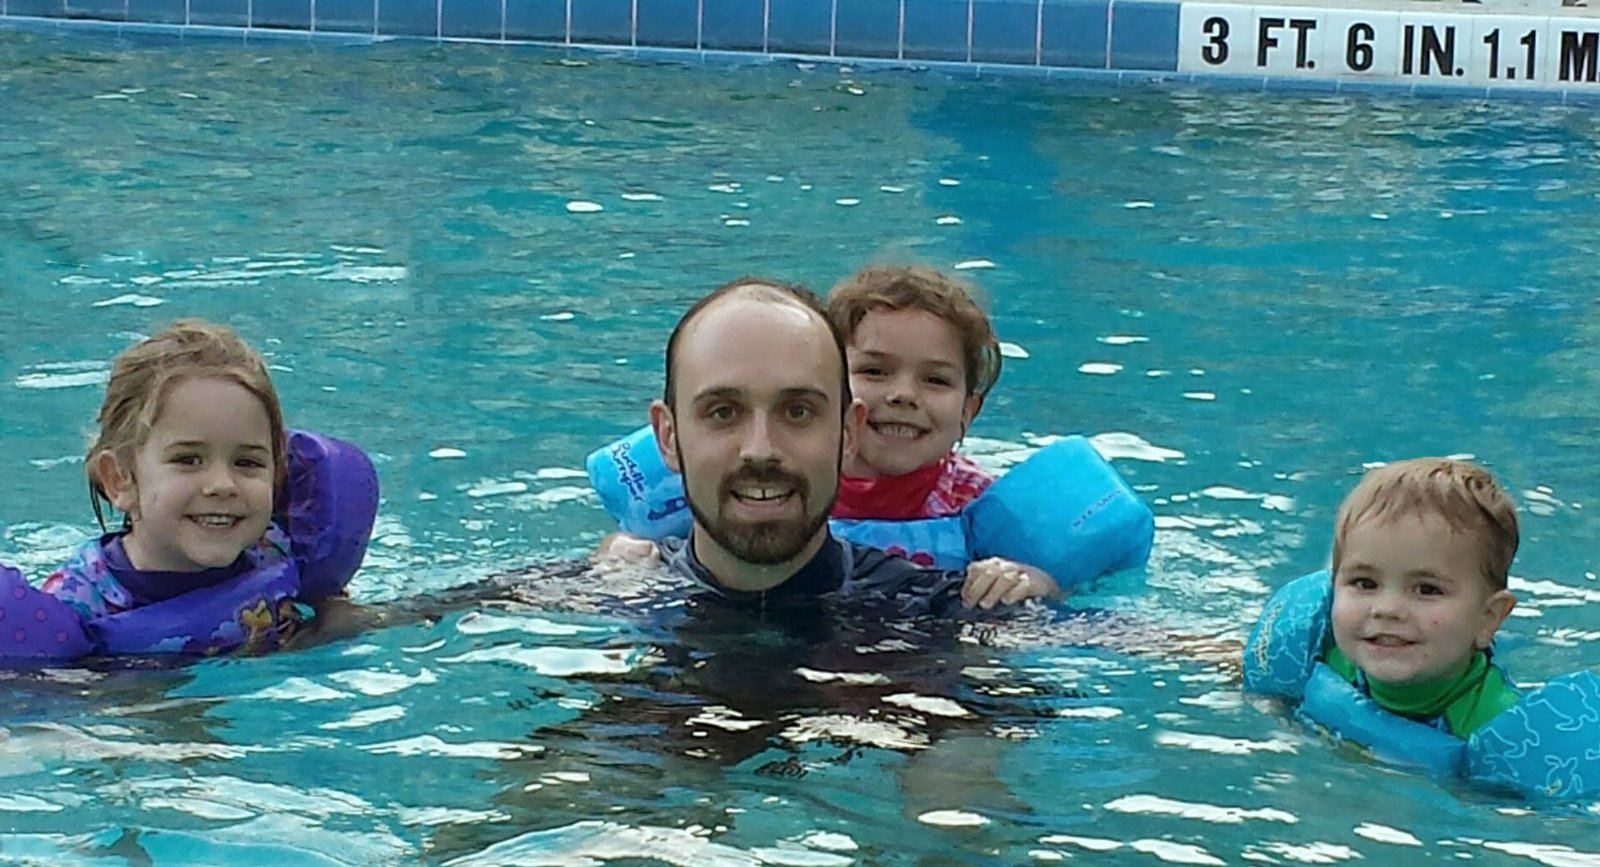 James and Kids at the Pool